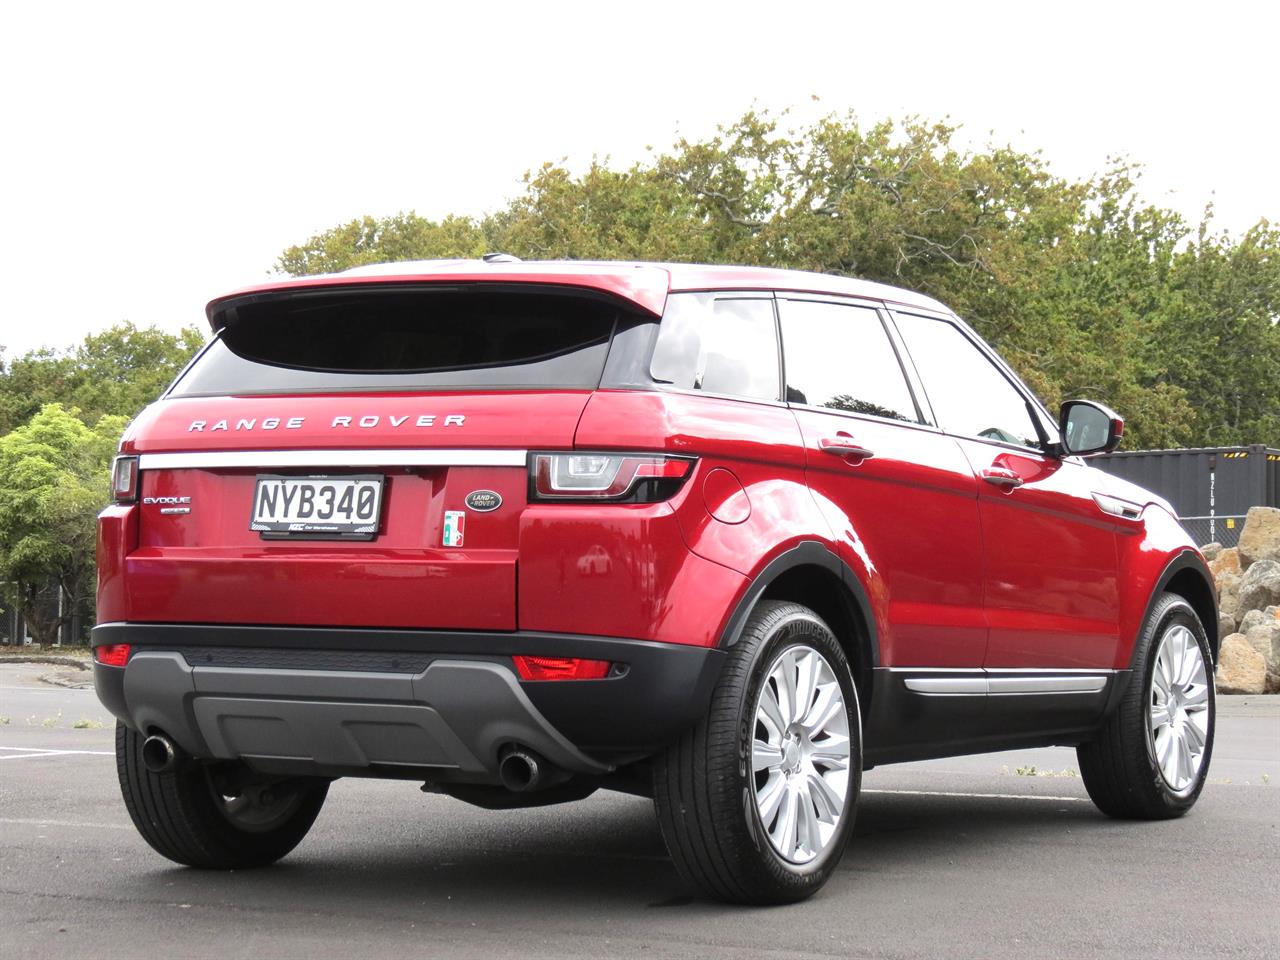 2015 Land Rover Range Rover Evoque only $122 weekly